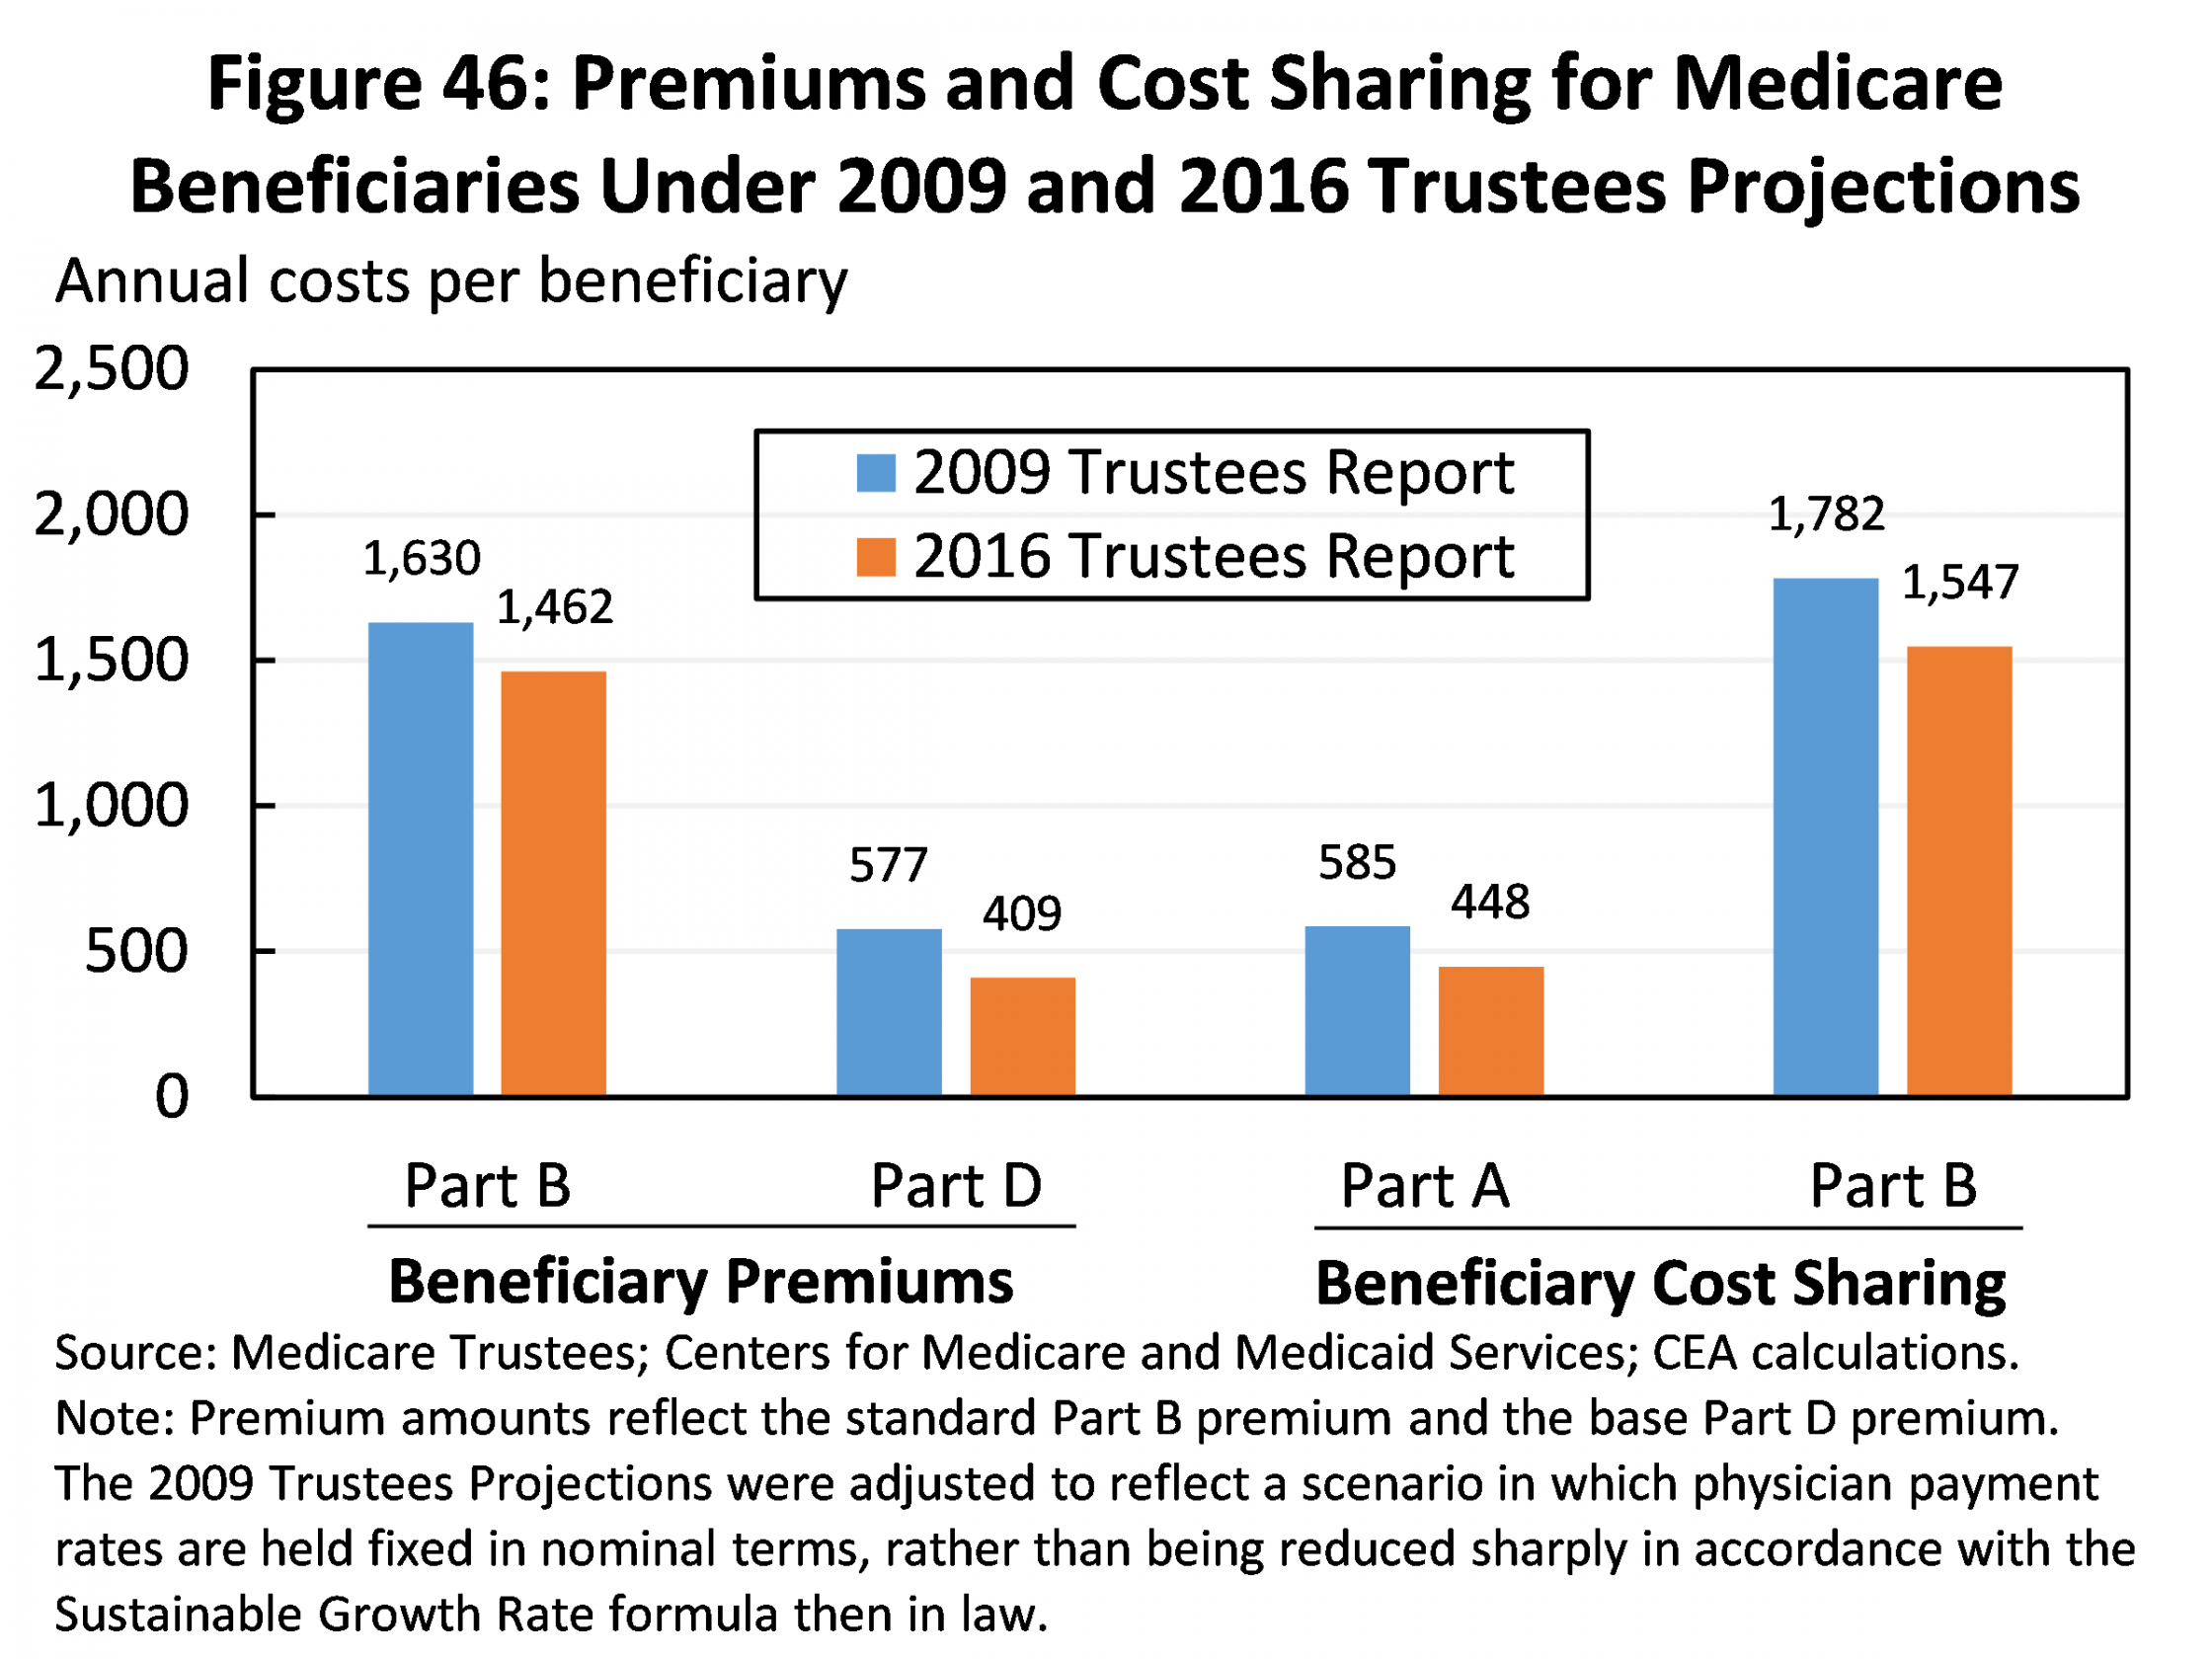 Premiums and Cost Sharing for Medicare BeneficiarieUnder 2009 and 2016 Trustees Projections